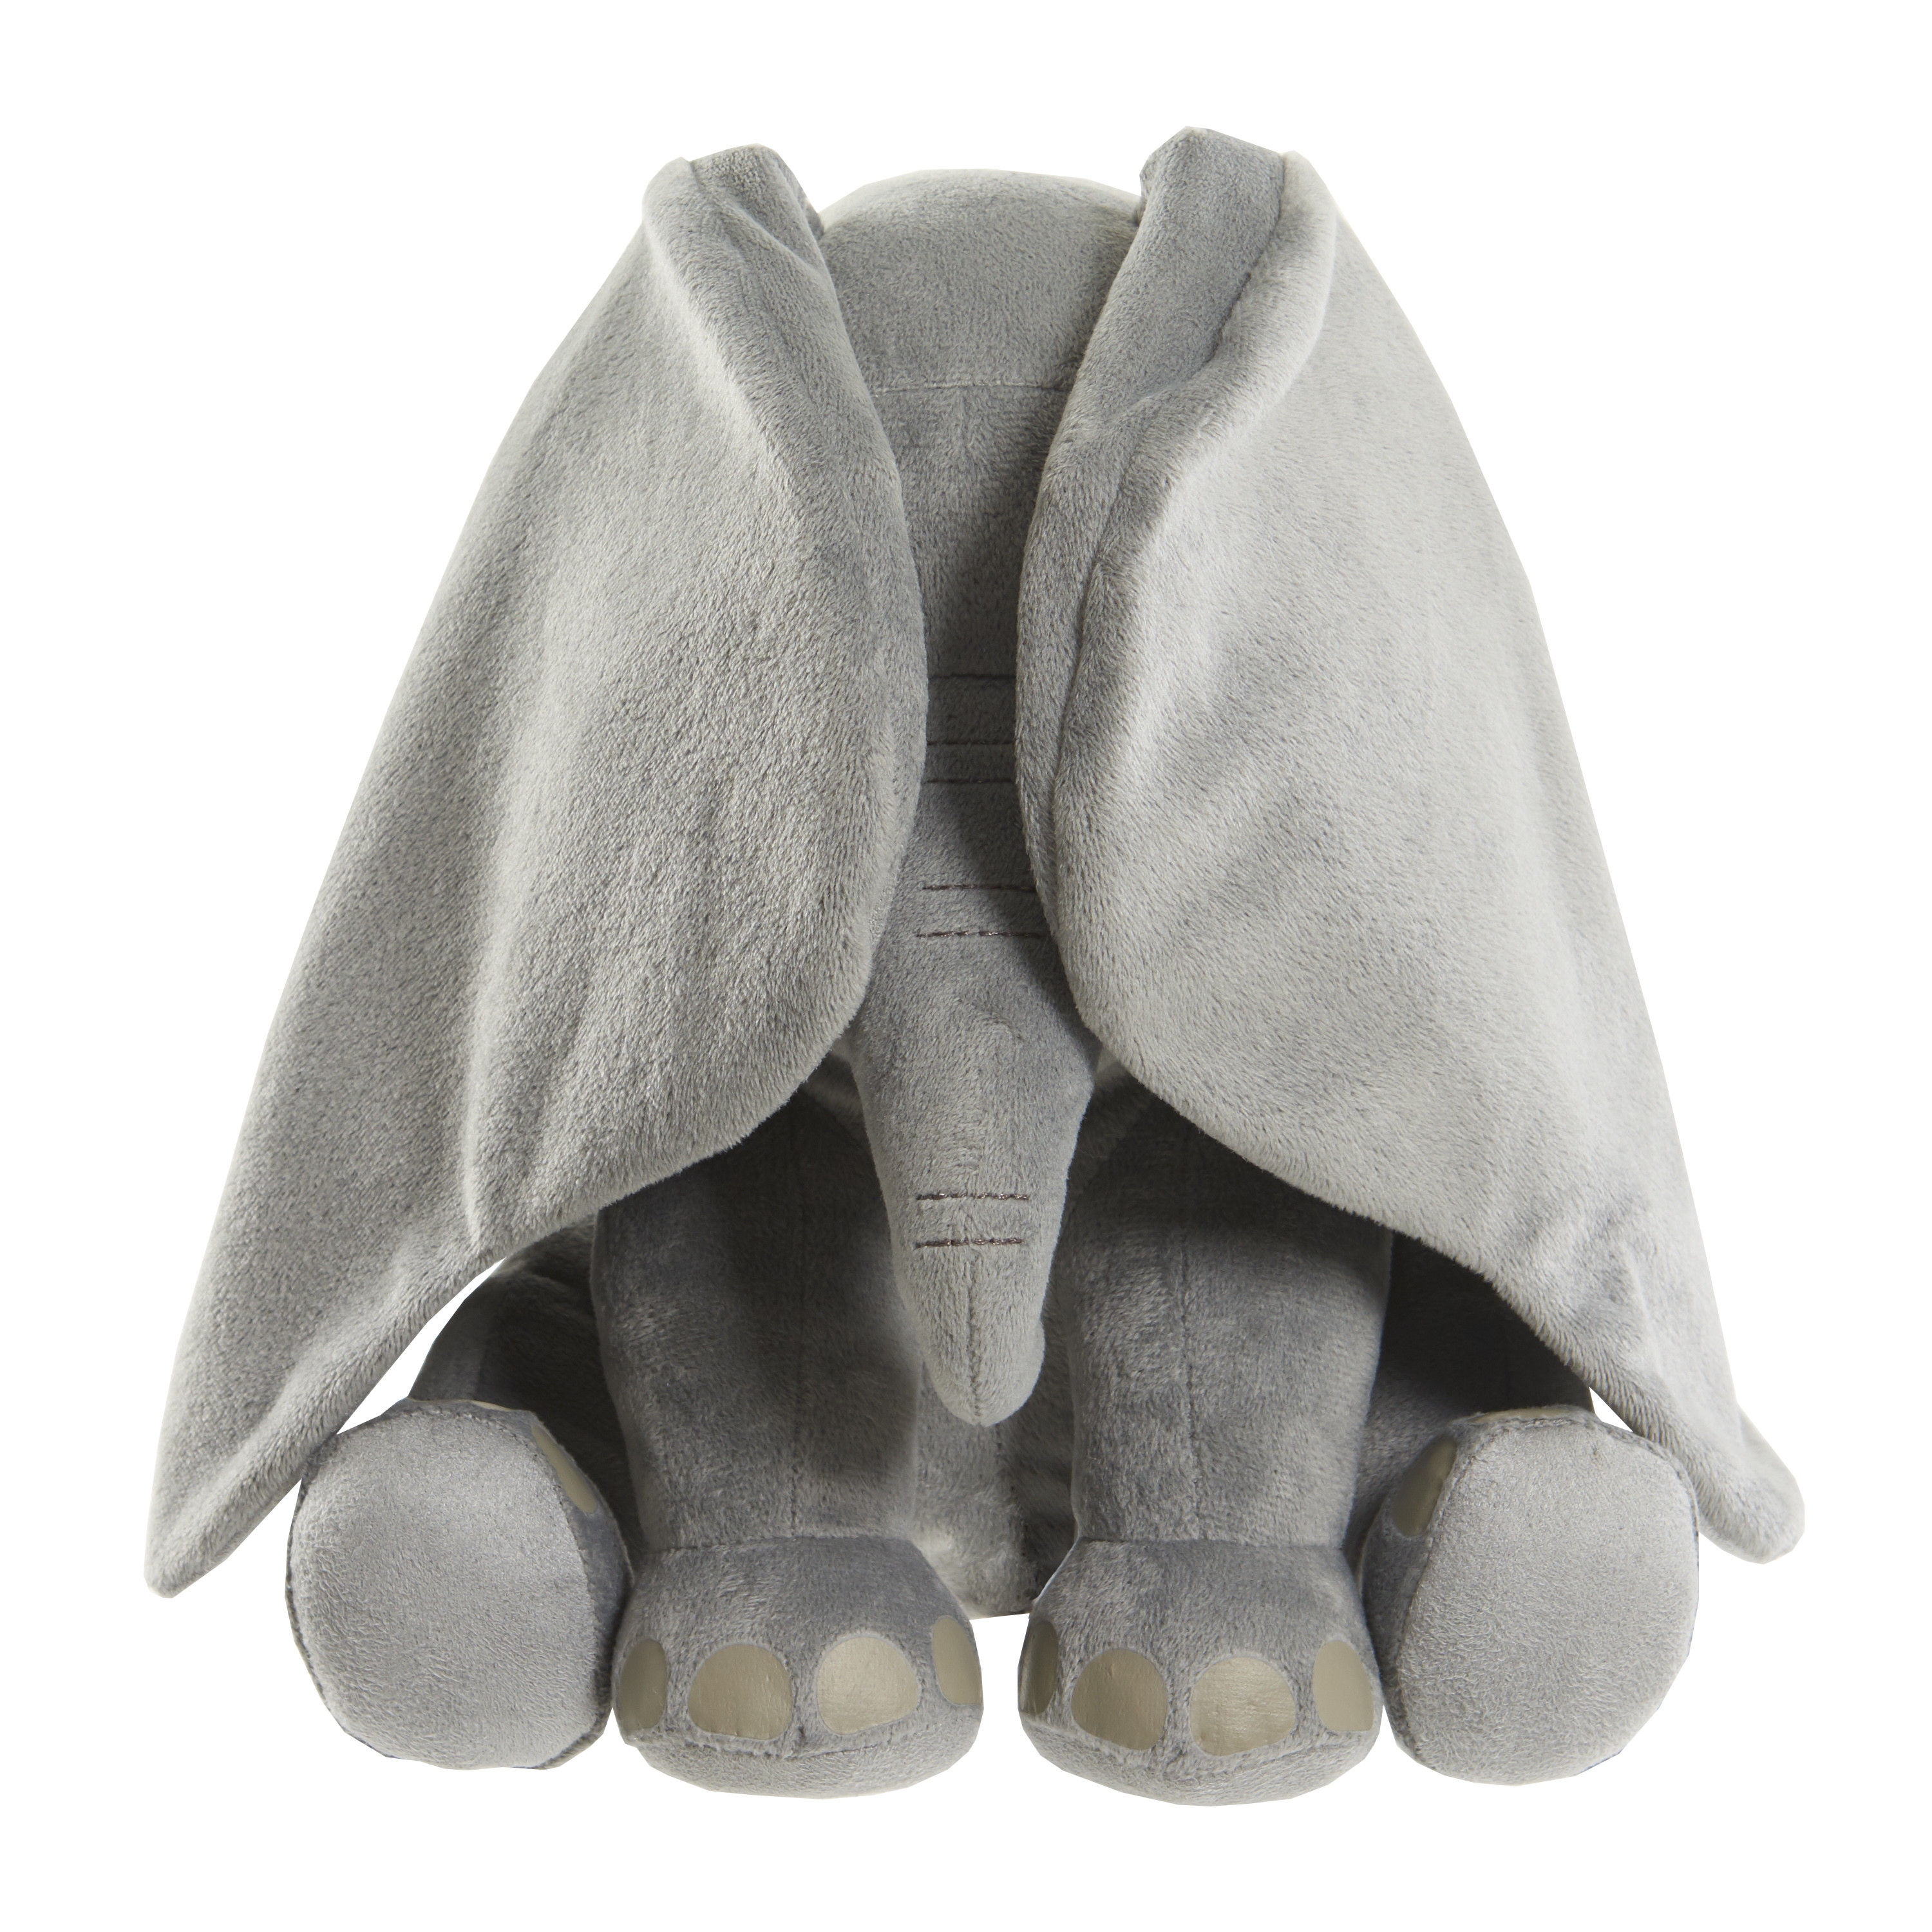 Disney's Dumbo Fluttering Ears, Dumbo, Officially Licensed Kids Toys for Ages 3 Up, Gifts and Presents - image 3 of 4